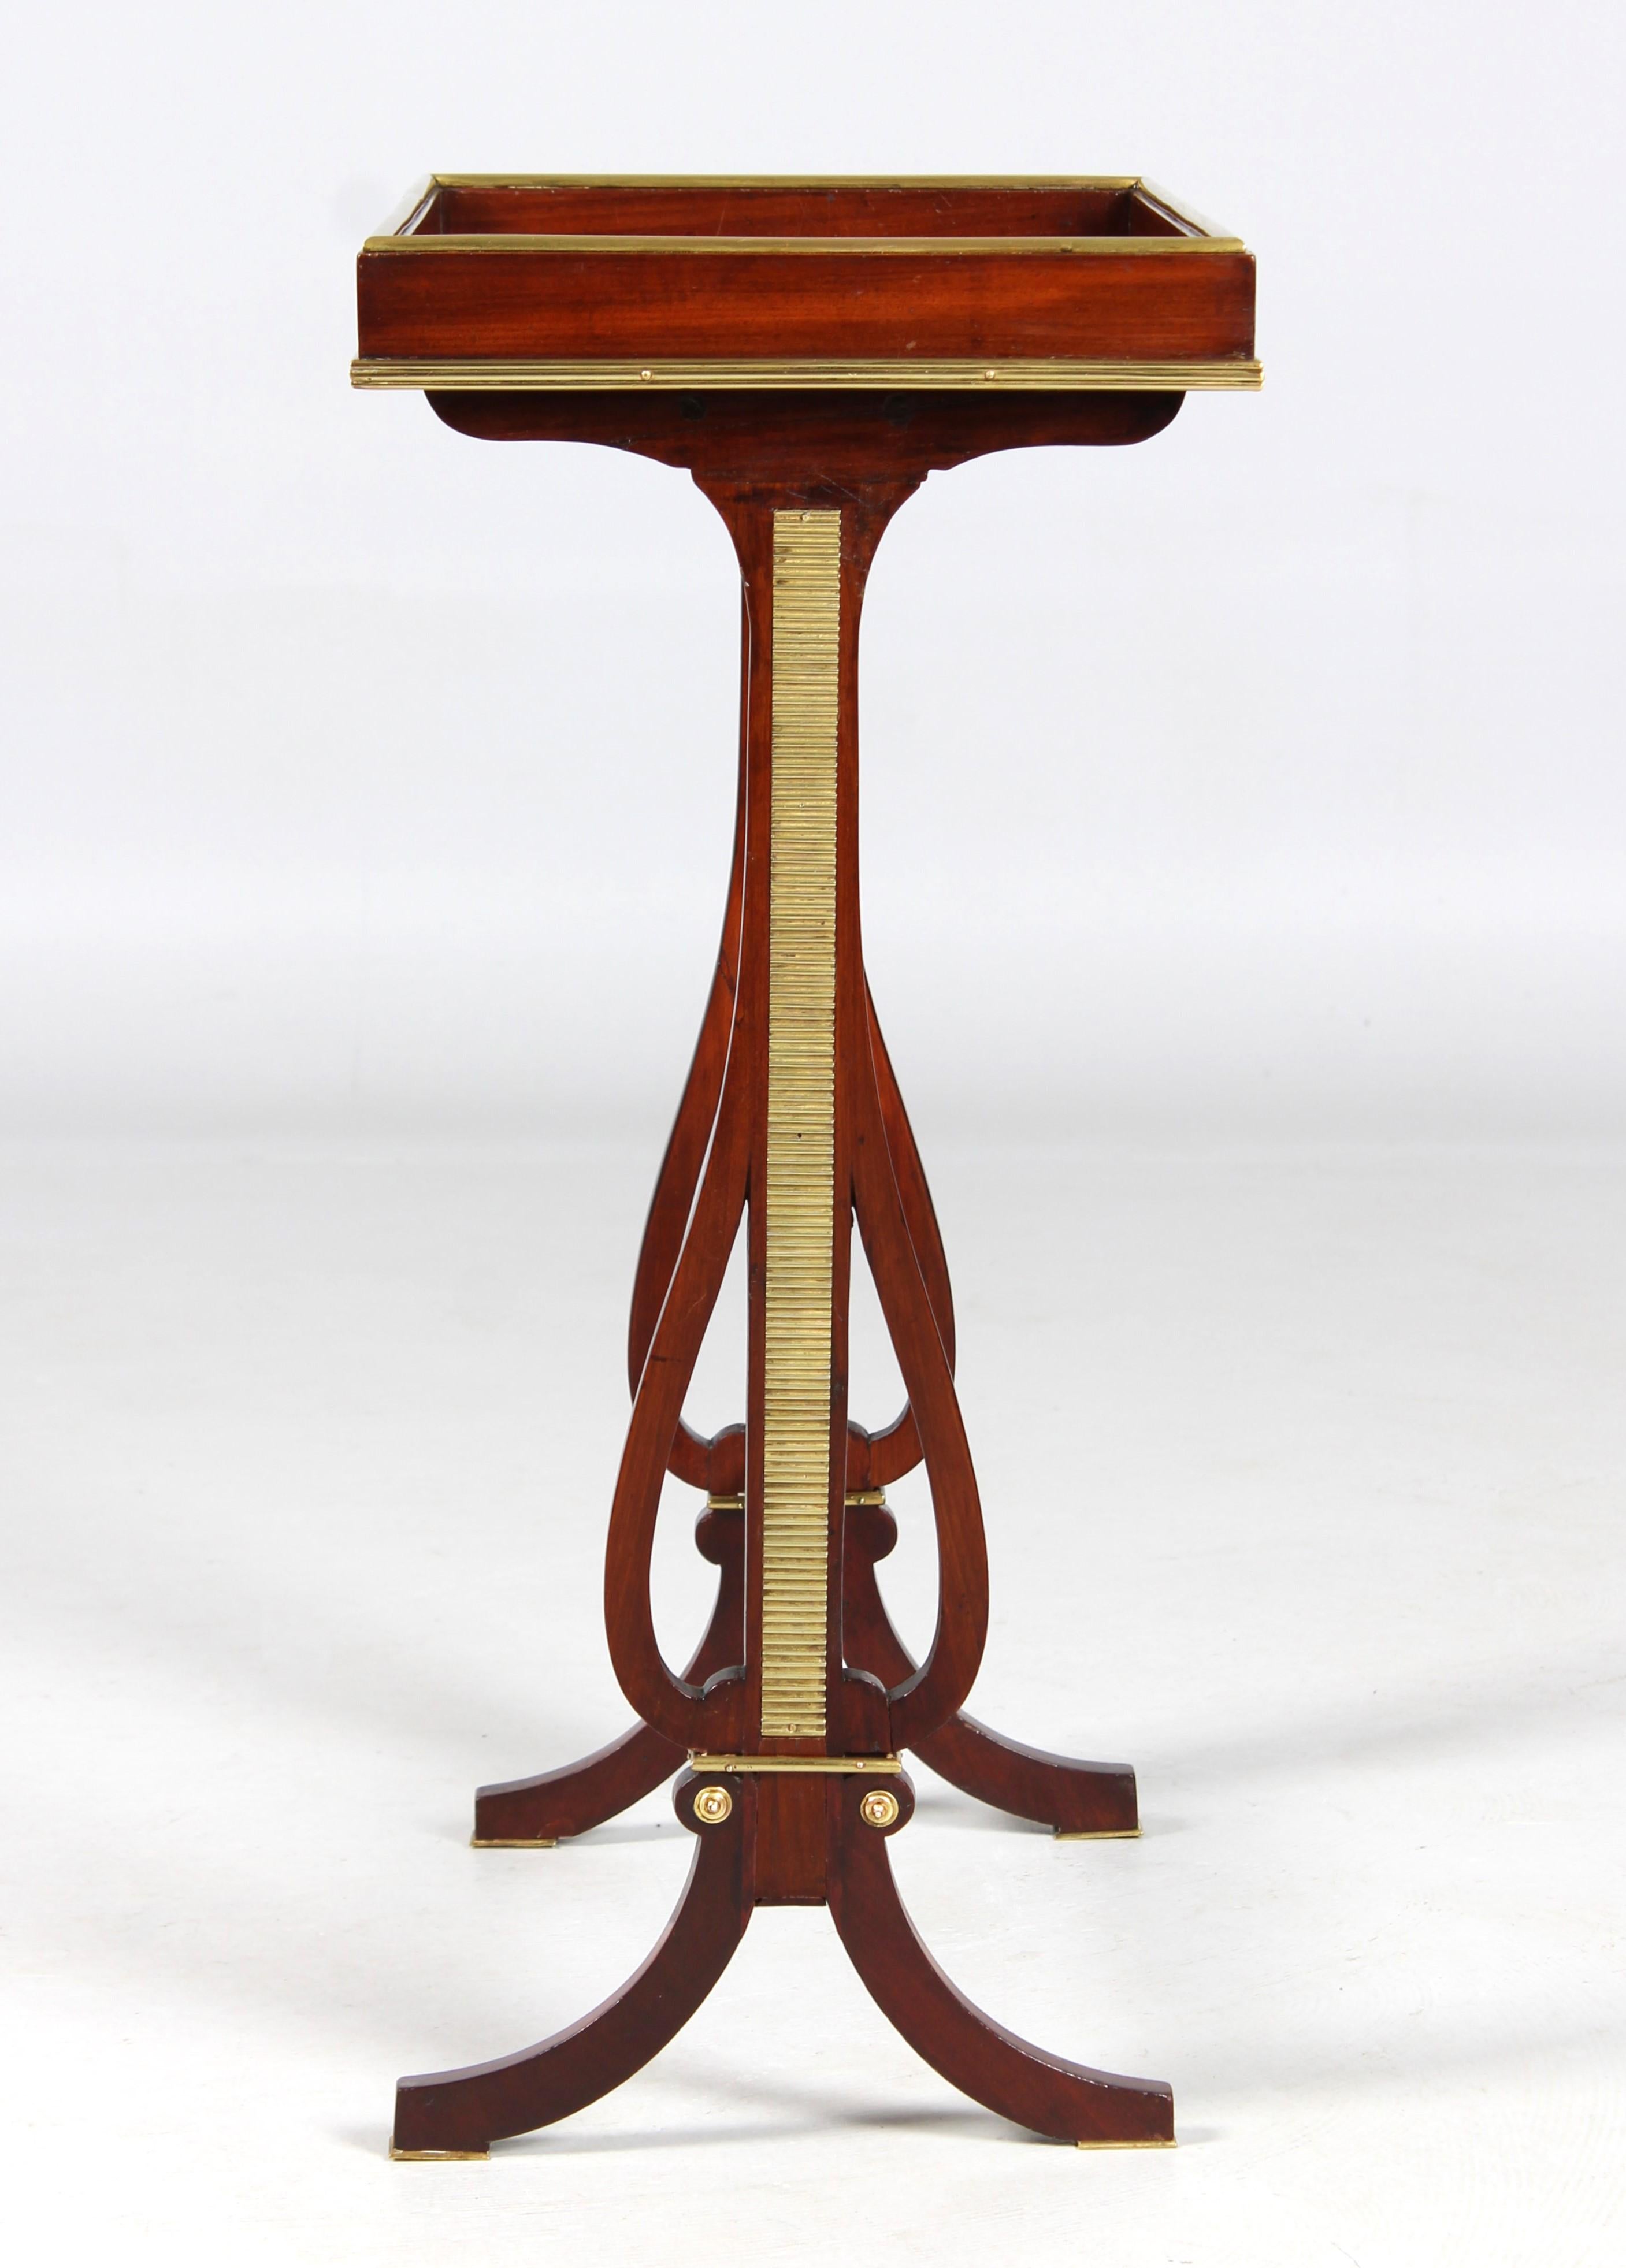 Louis XVI side table - so-called Vide-Poche

Paris
Mahogany, brass, gilded bronze
around 1785

Dimensions: H x W x D: 72 x 50 x 33 cm

Description:
Two filigree lyres with embedded cast and hand-filed chequer plates, connected by a cross strut also